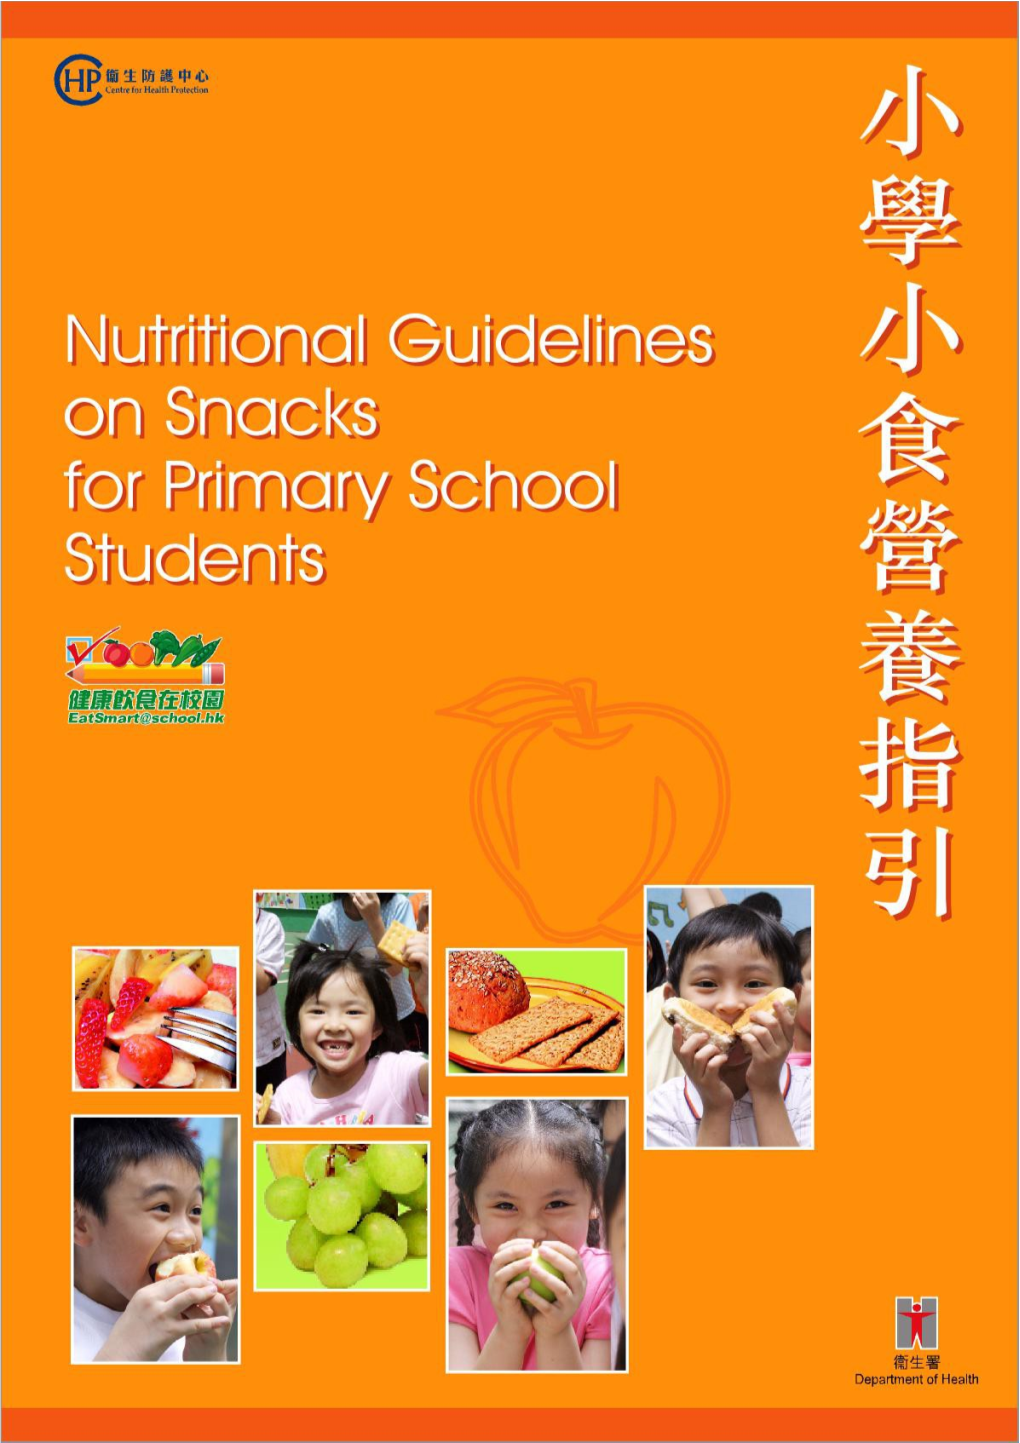 Promoting Healthy Eating in Primary Students by Establishing